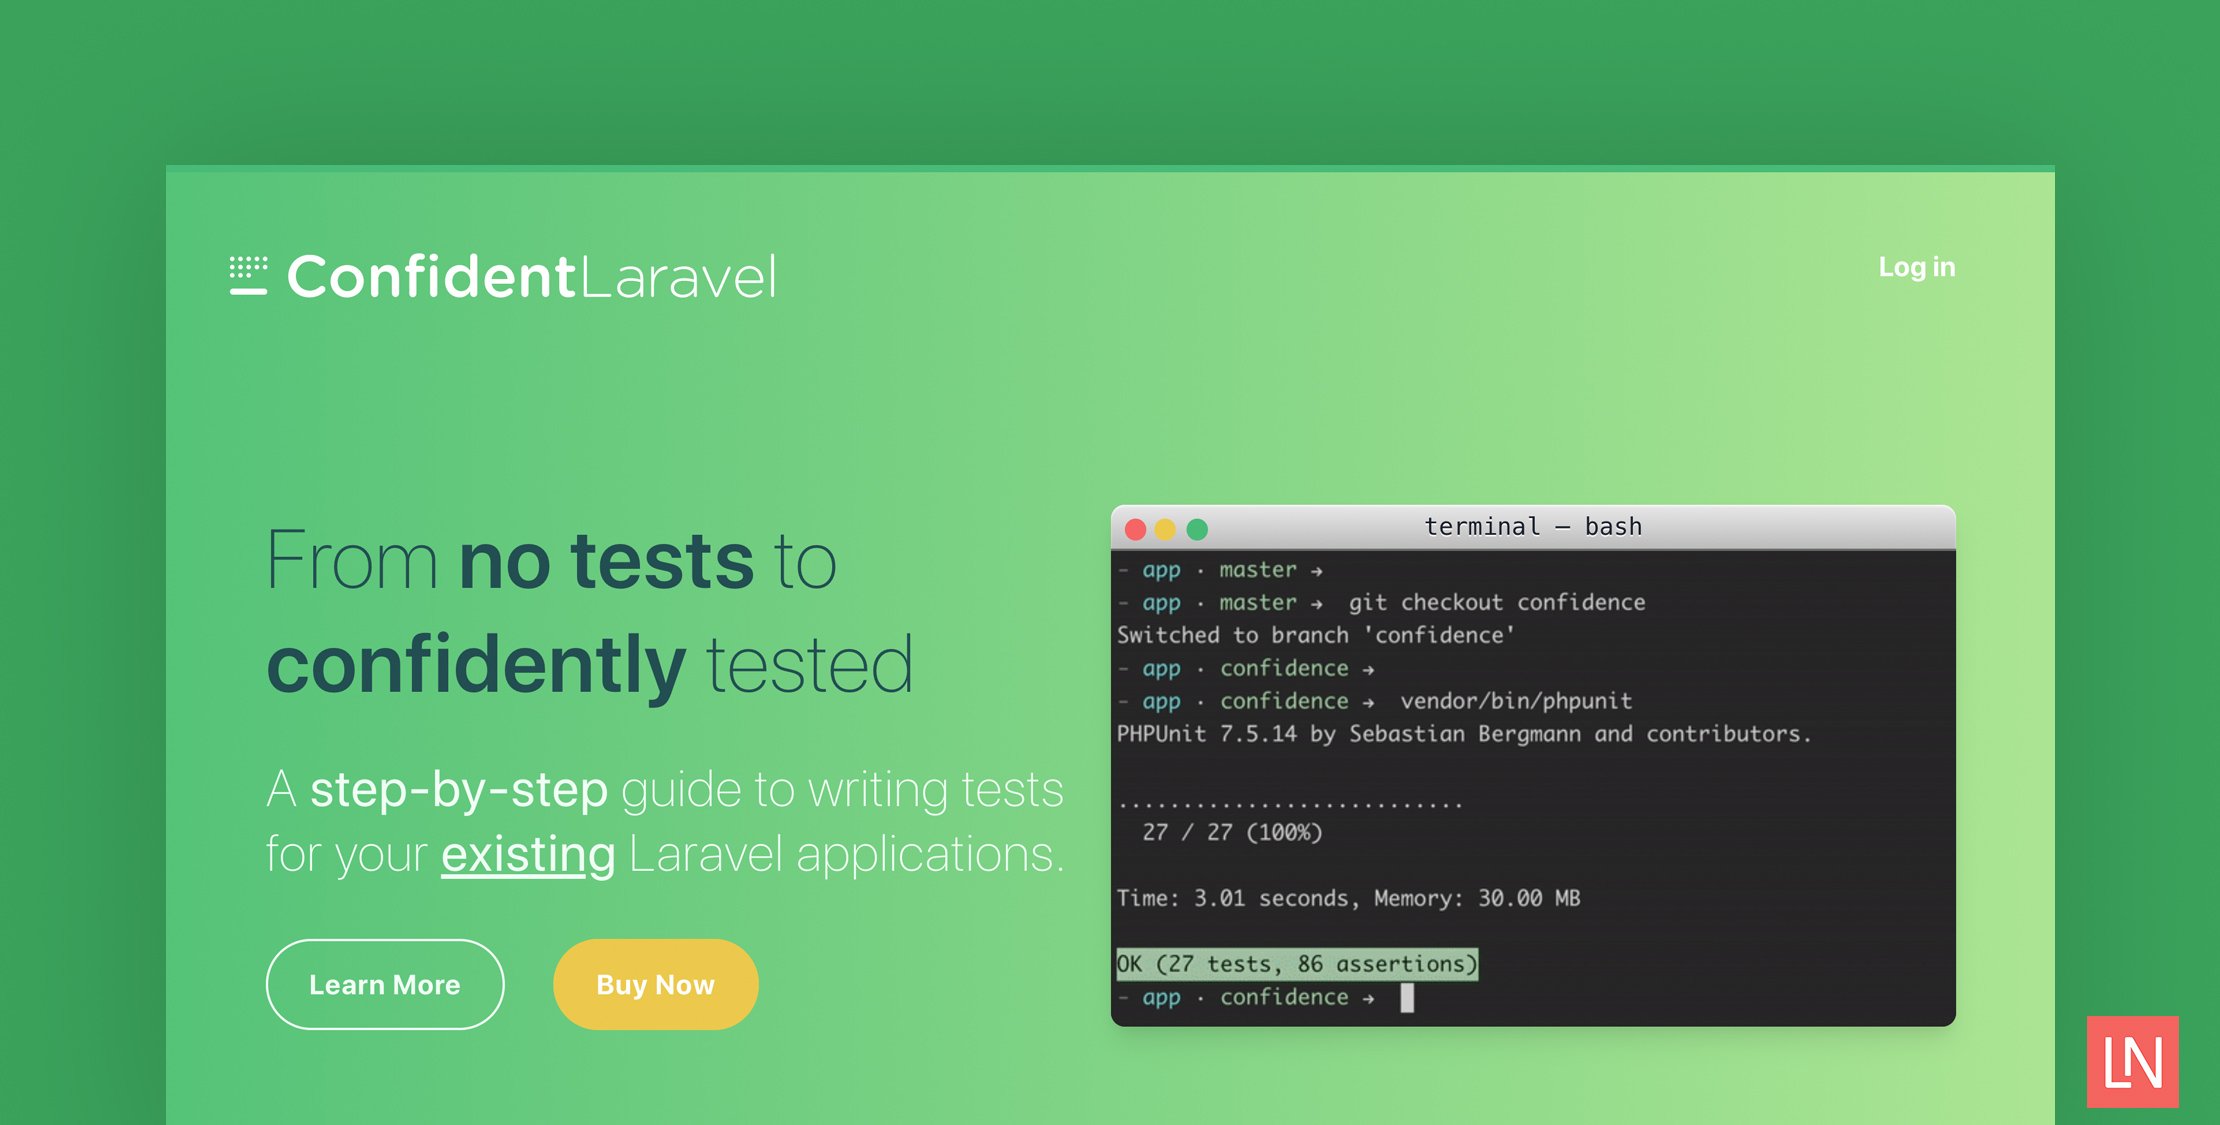 Learn to start testing your existing codebase with Confident Laravel image